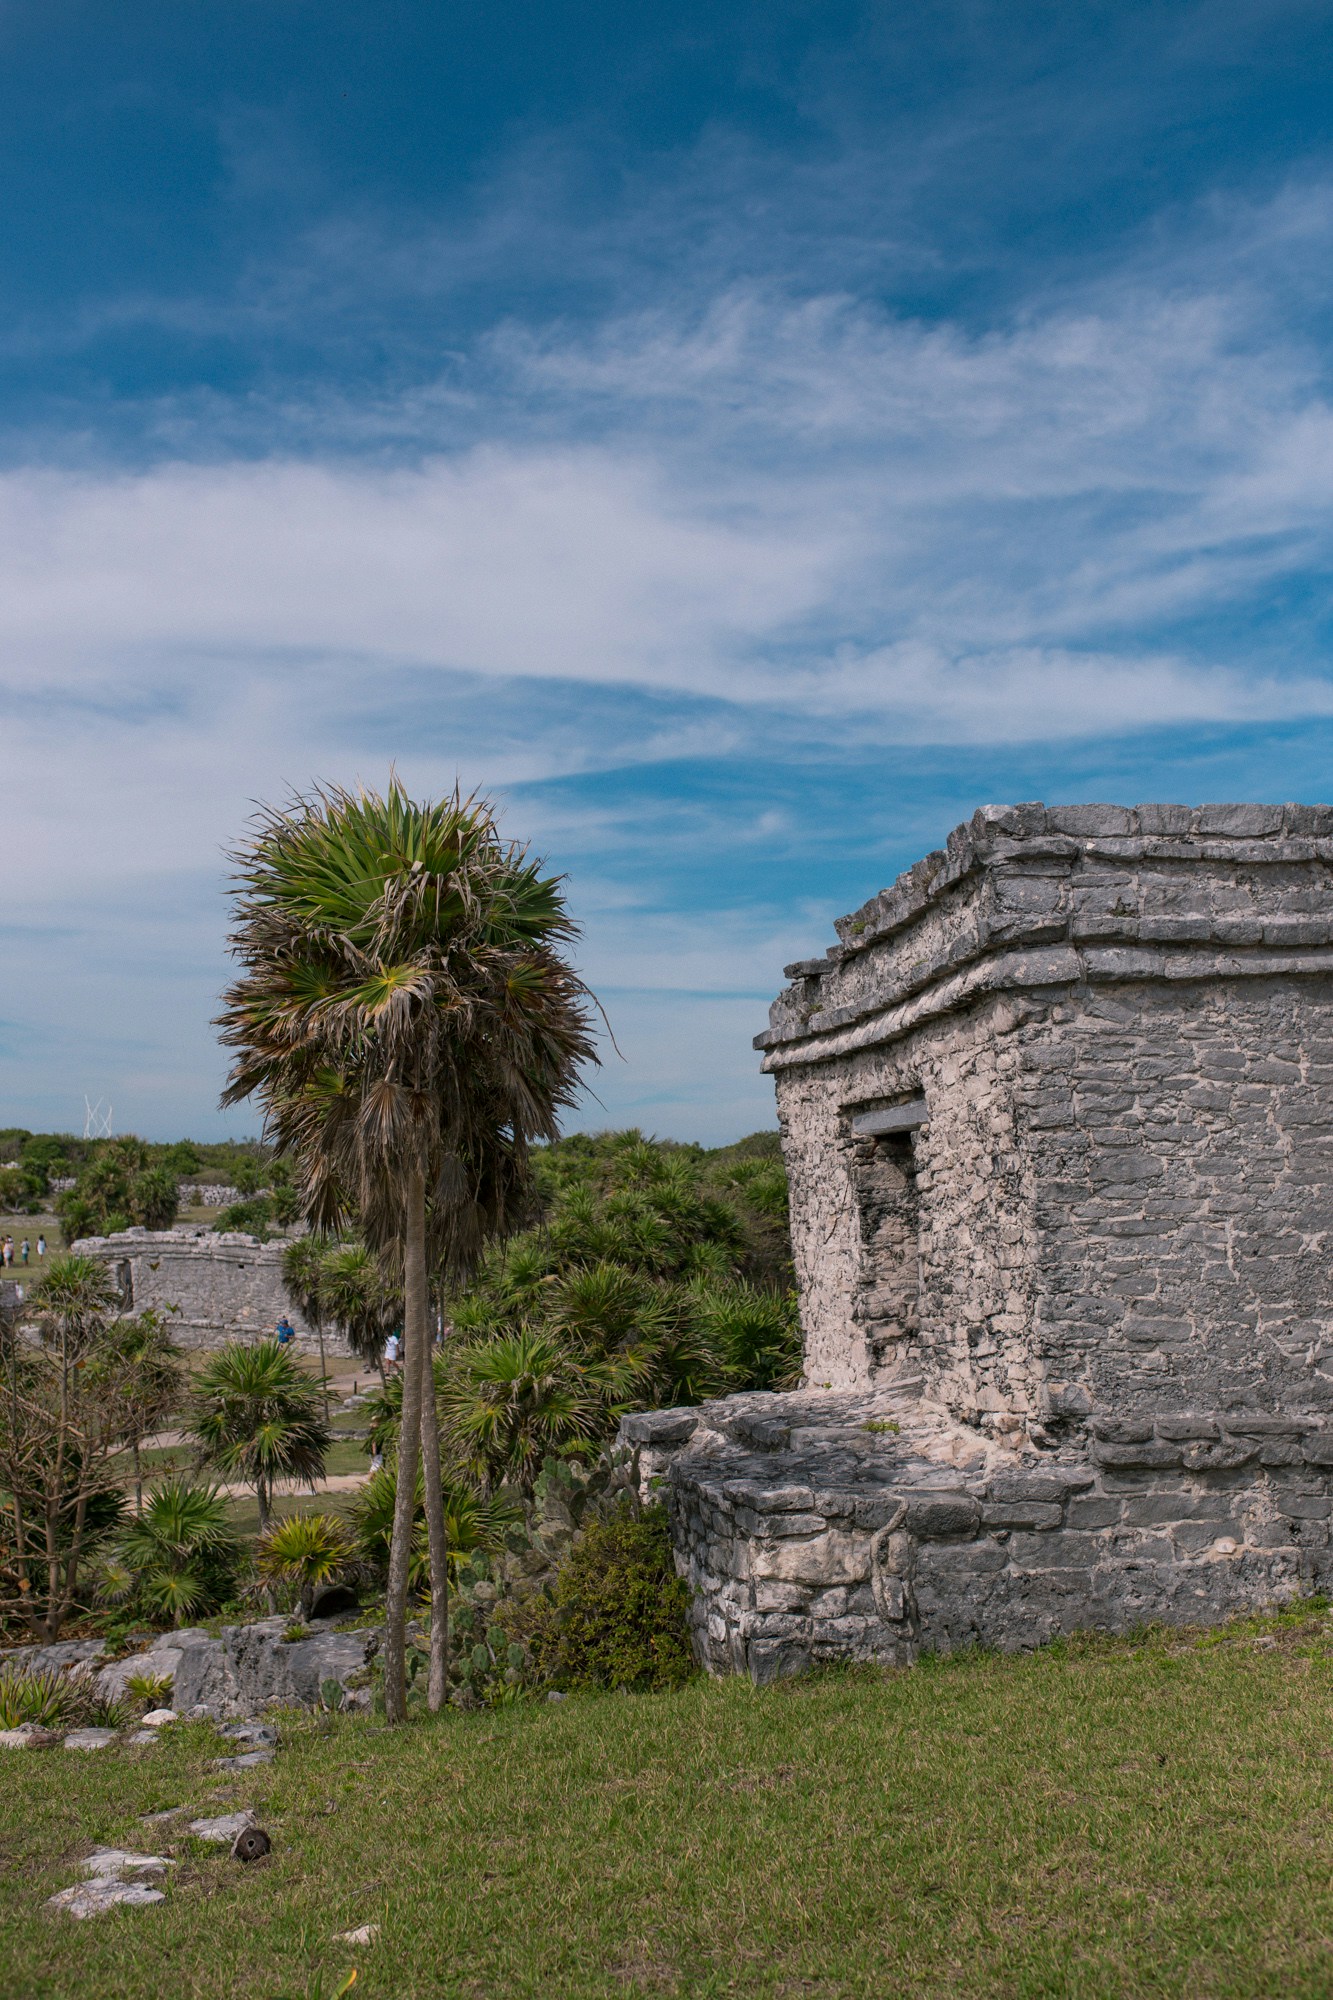 Gorgeous views at the Mayan ruins of Tulum